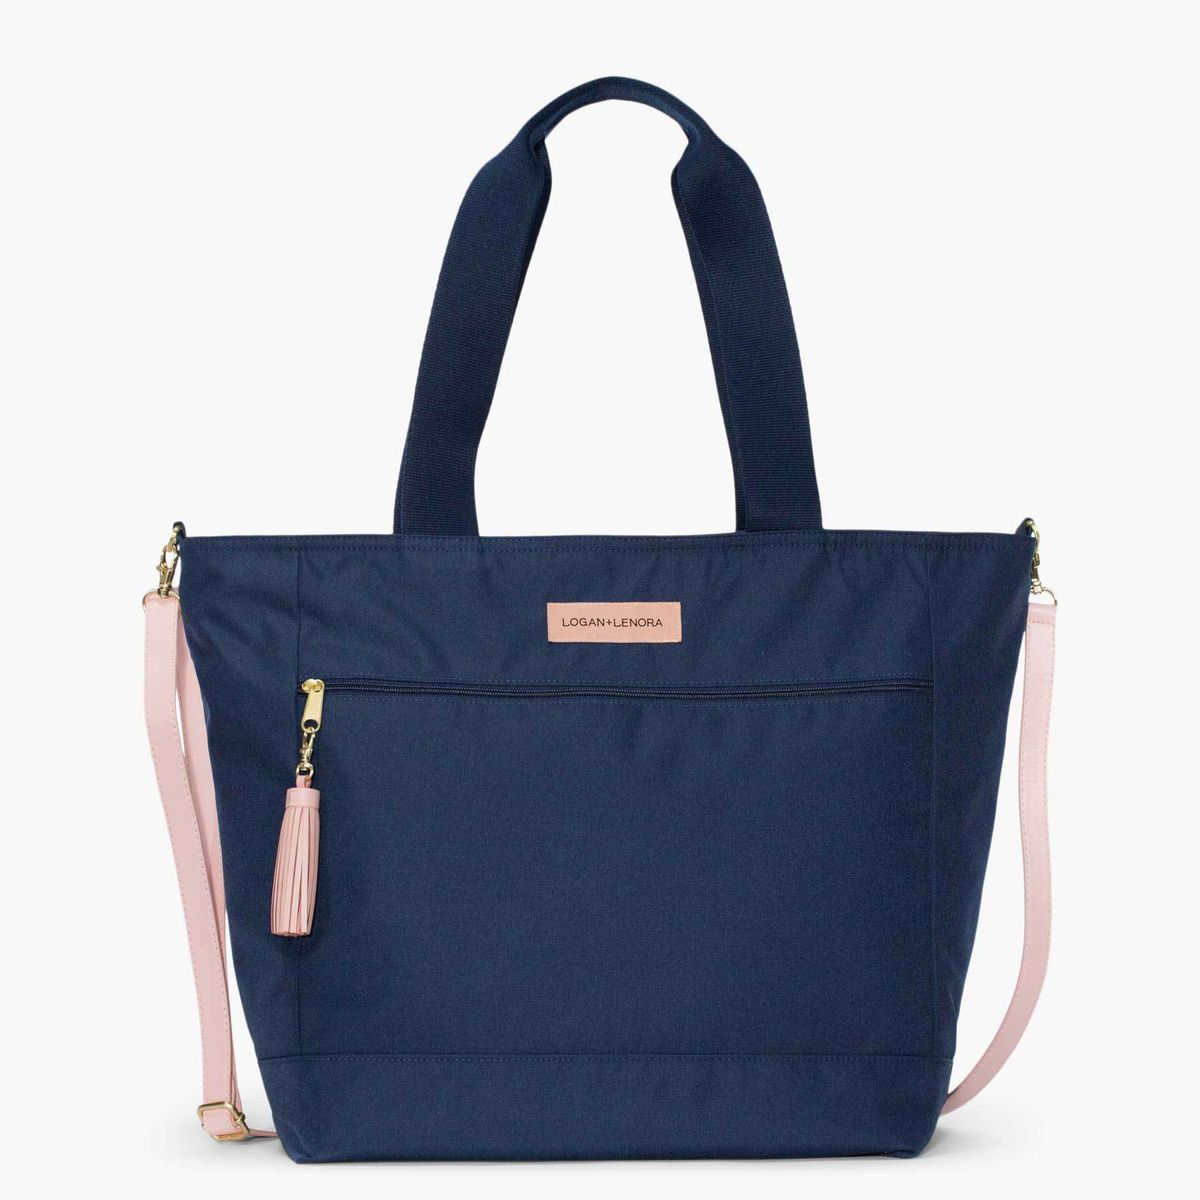 A New Day Details about  / Structured Top Handle Work Tote Handbag